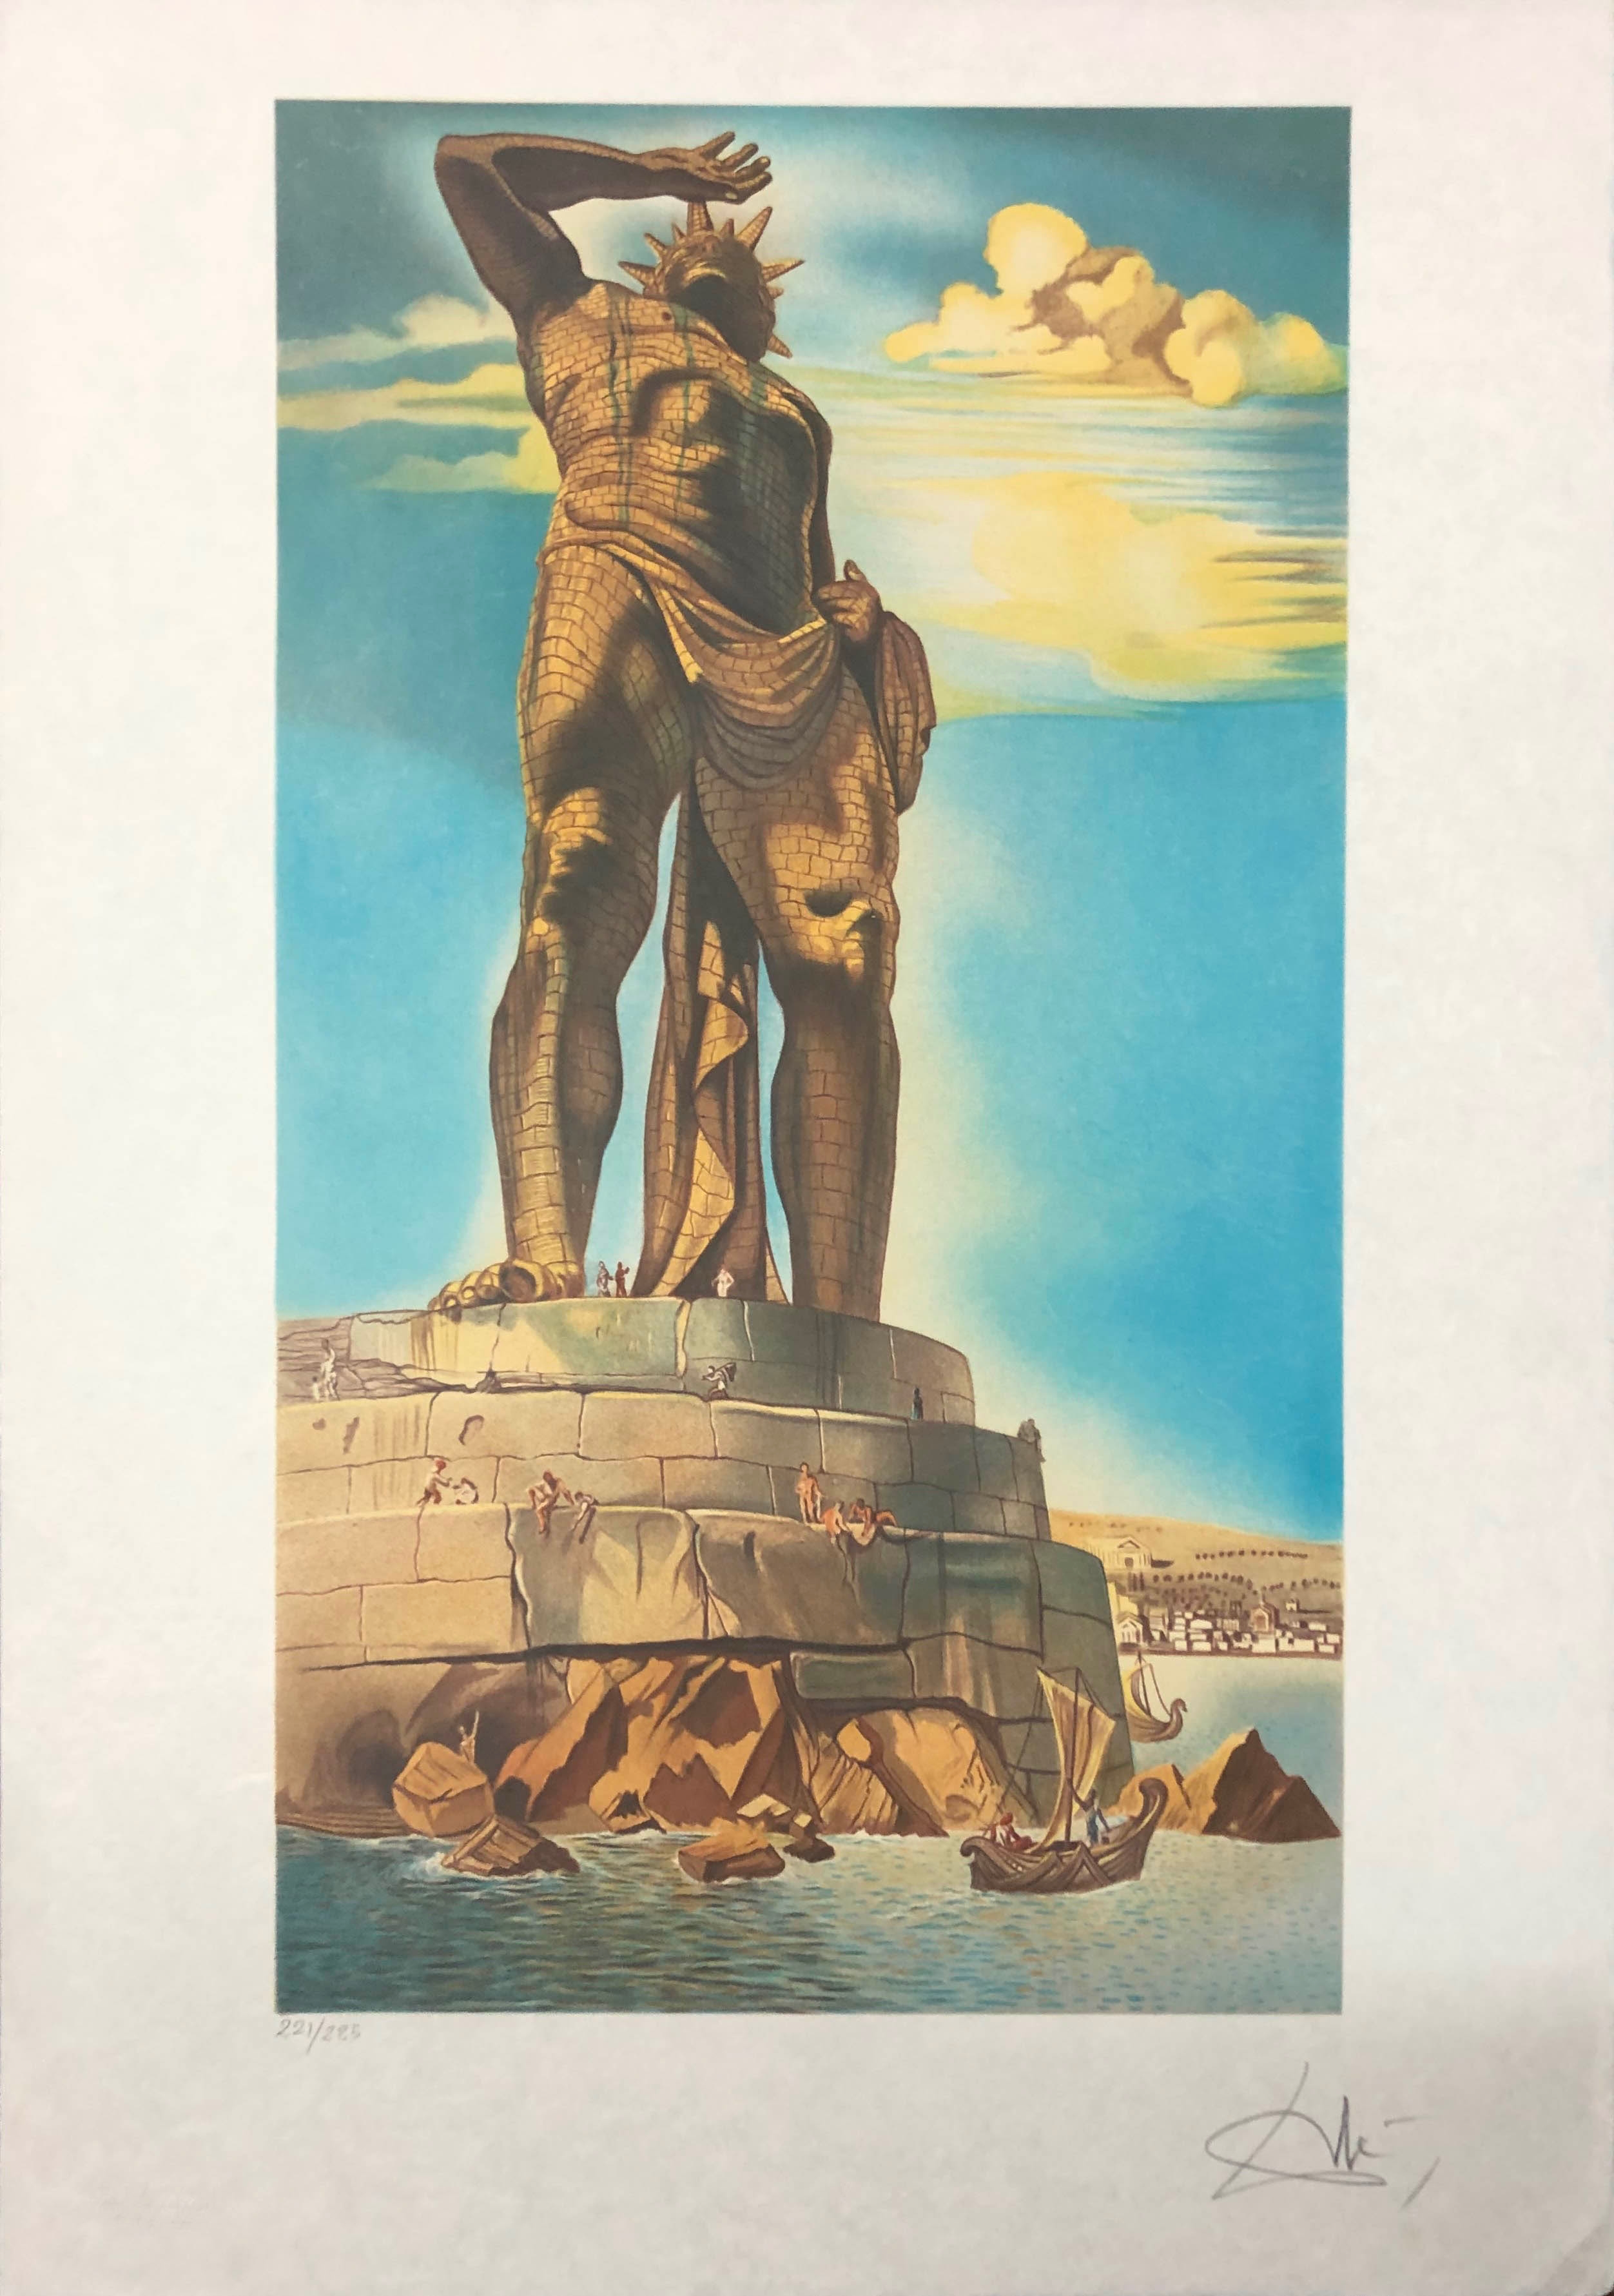 Colossus of Rhodes by Salvador Dalí